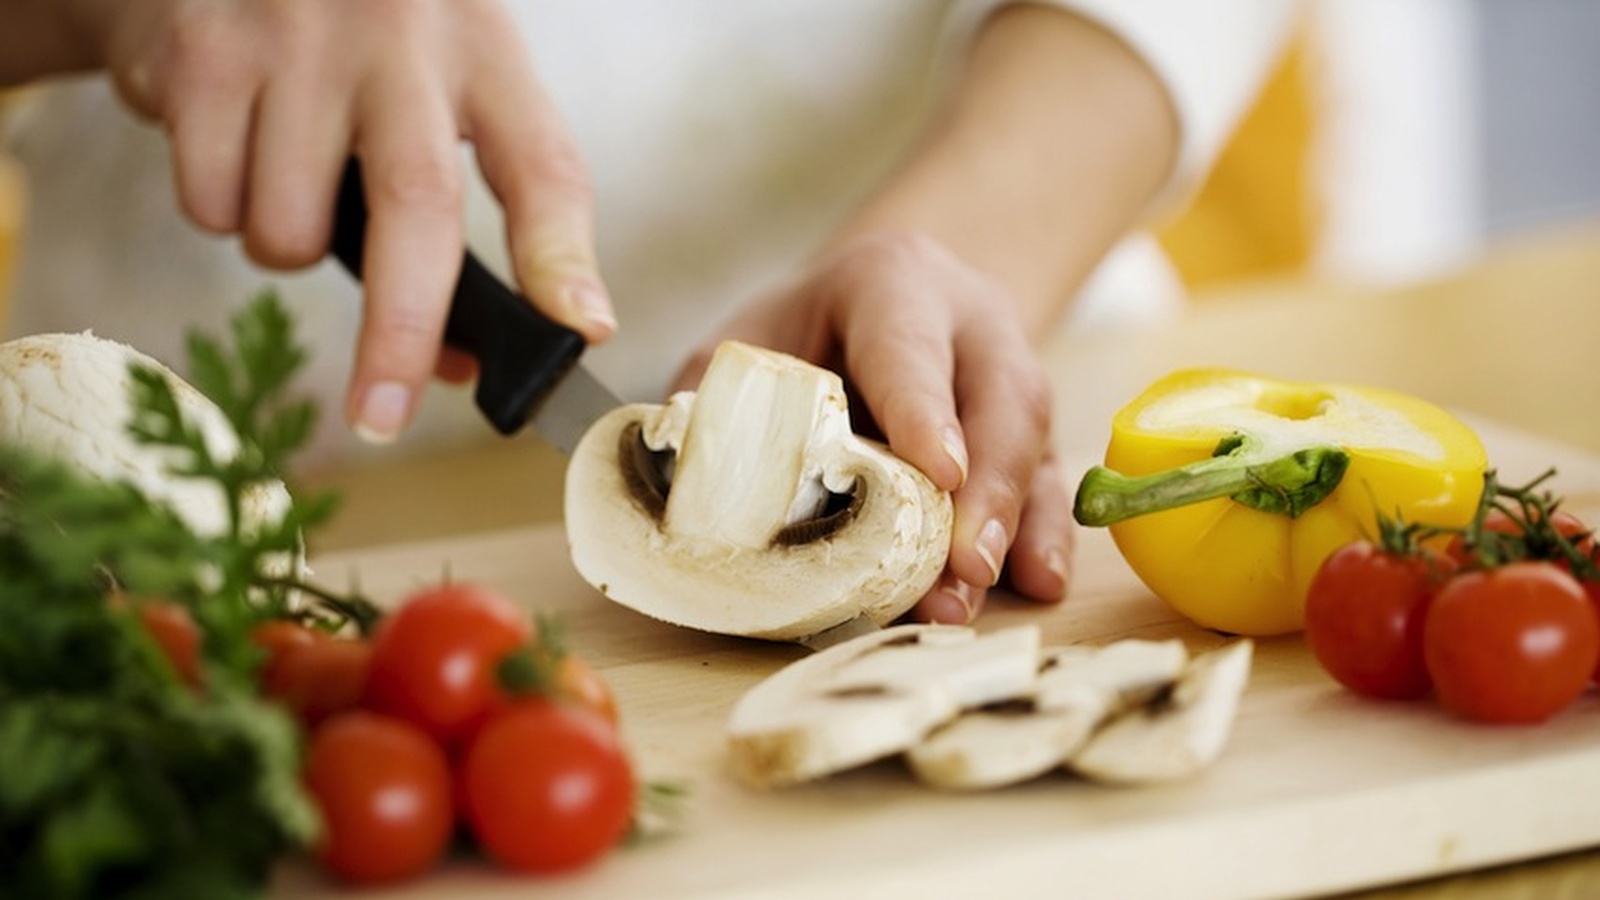 5 Essential Kitchen Tools for Healthy Eating